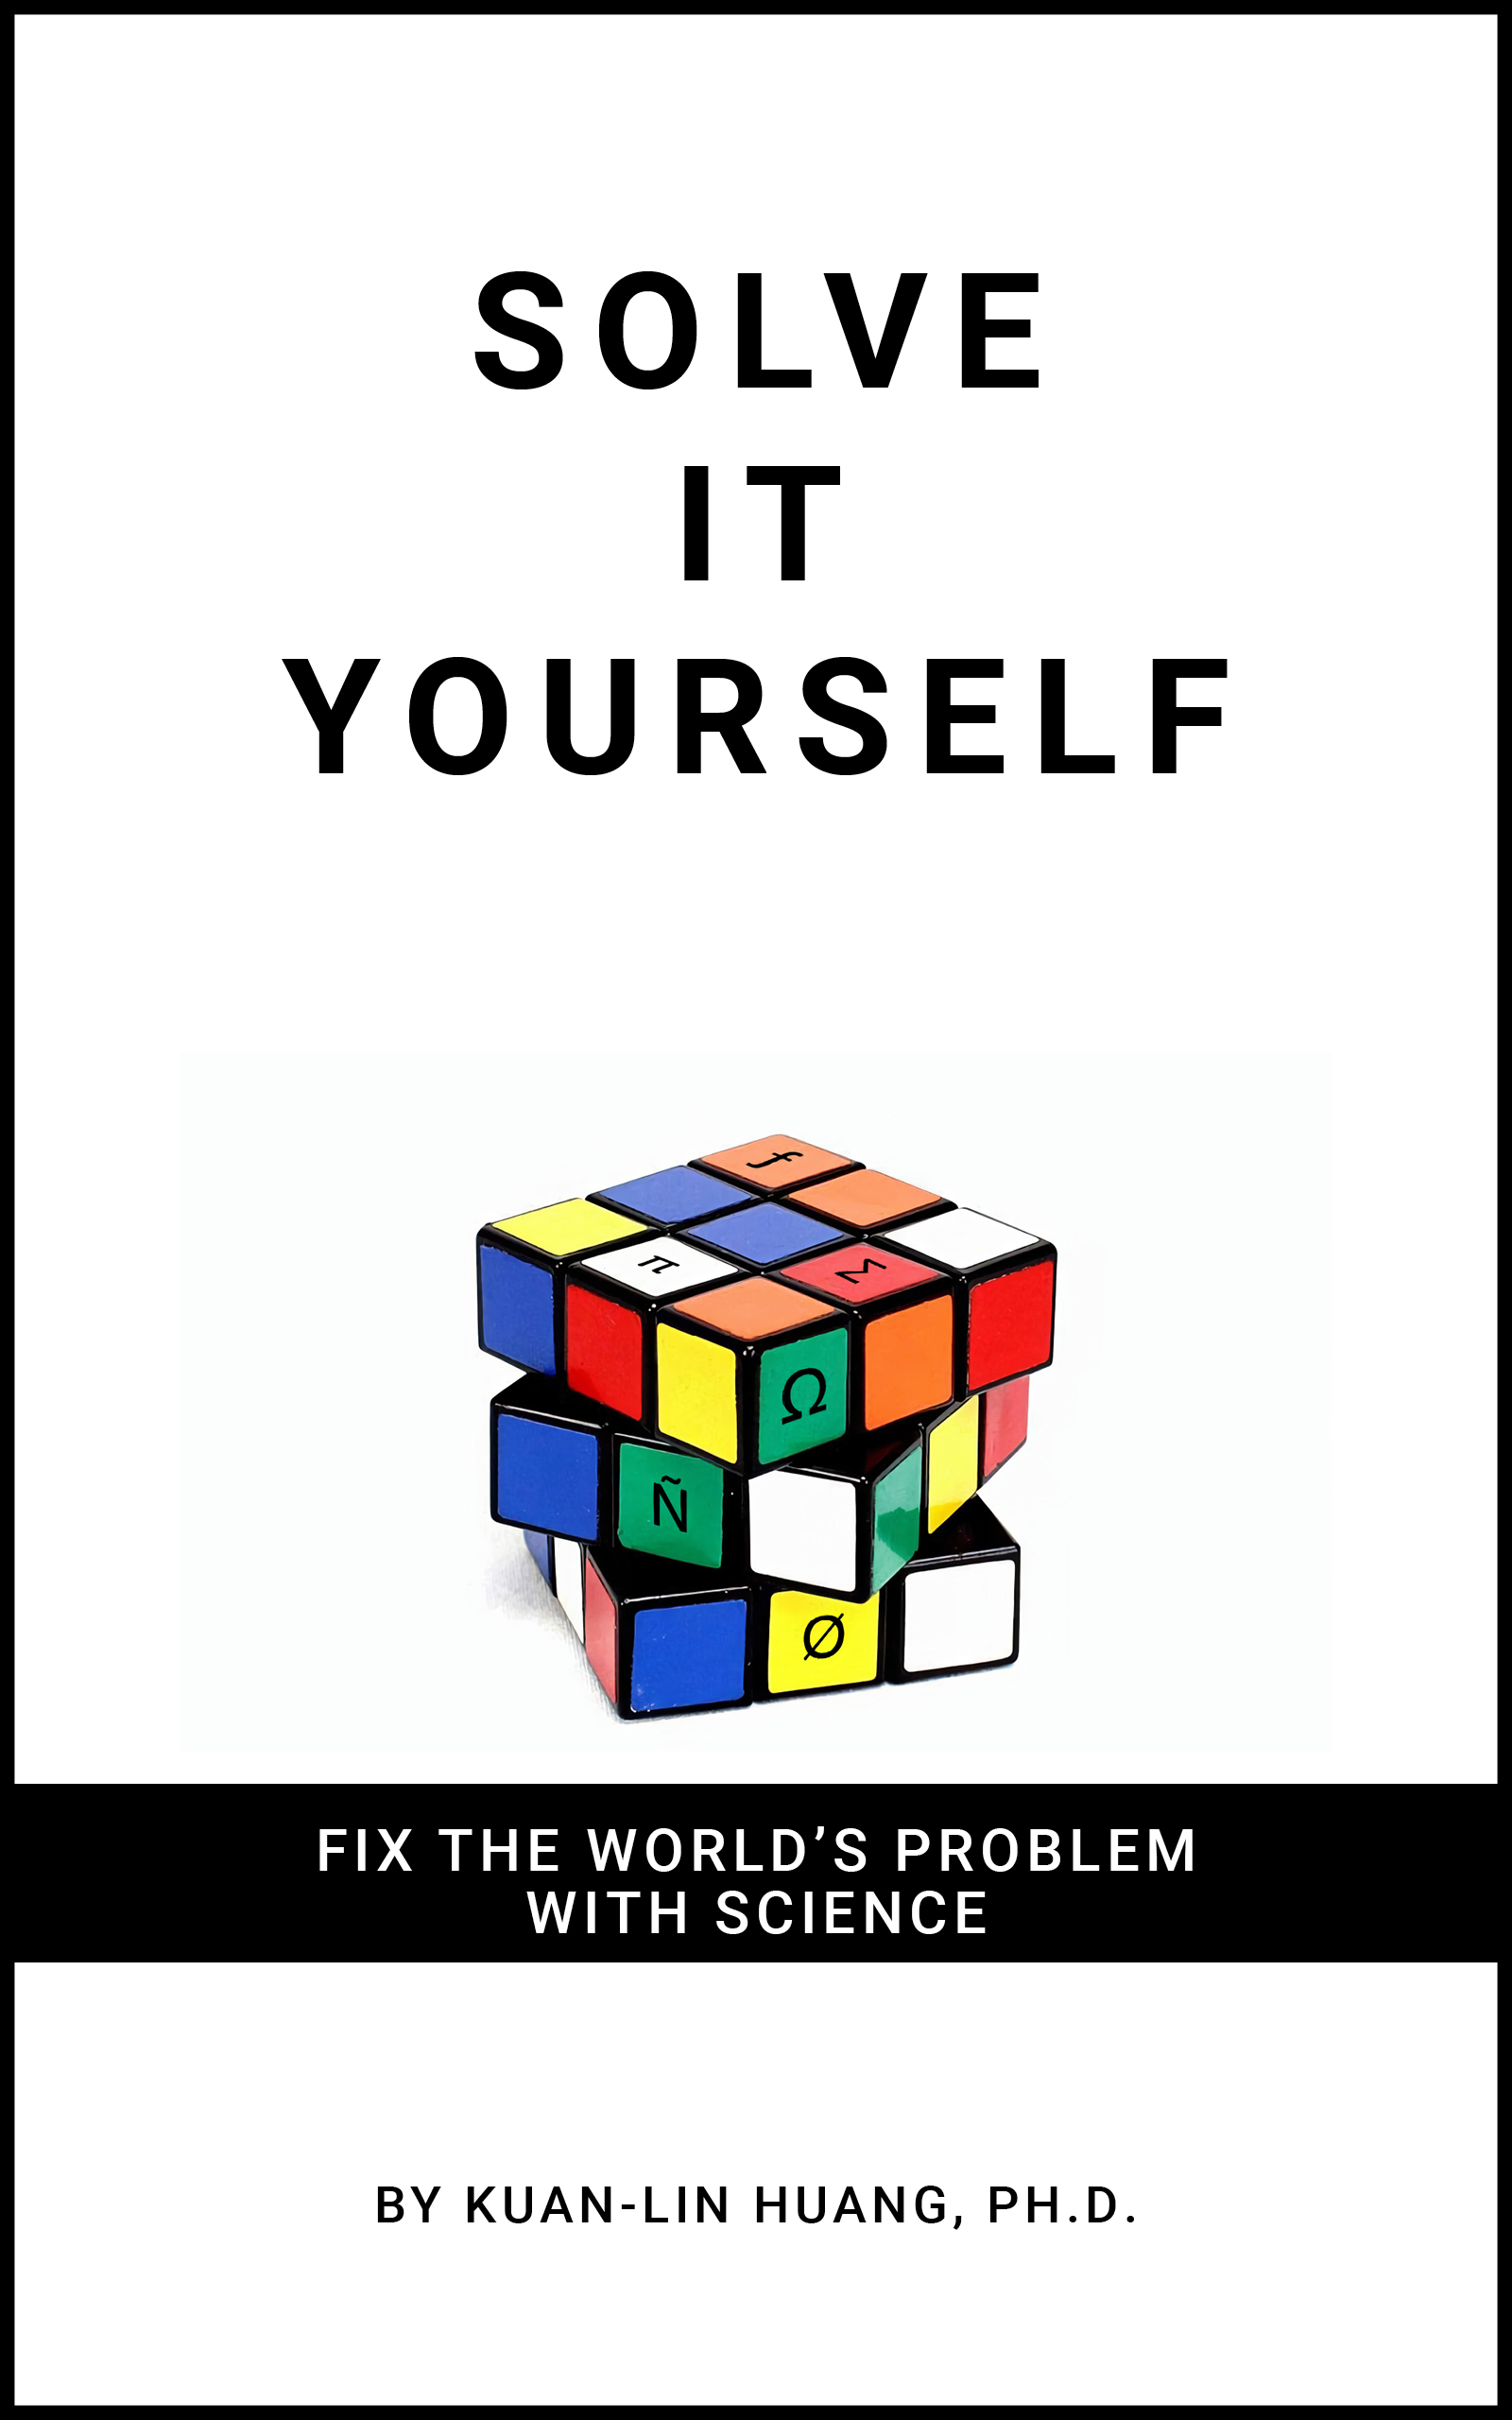 FREE: Solve It Yourself: Fix the World’s Problem with Science by Kuan-lin Huang